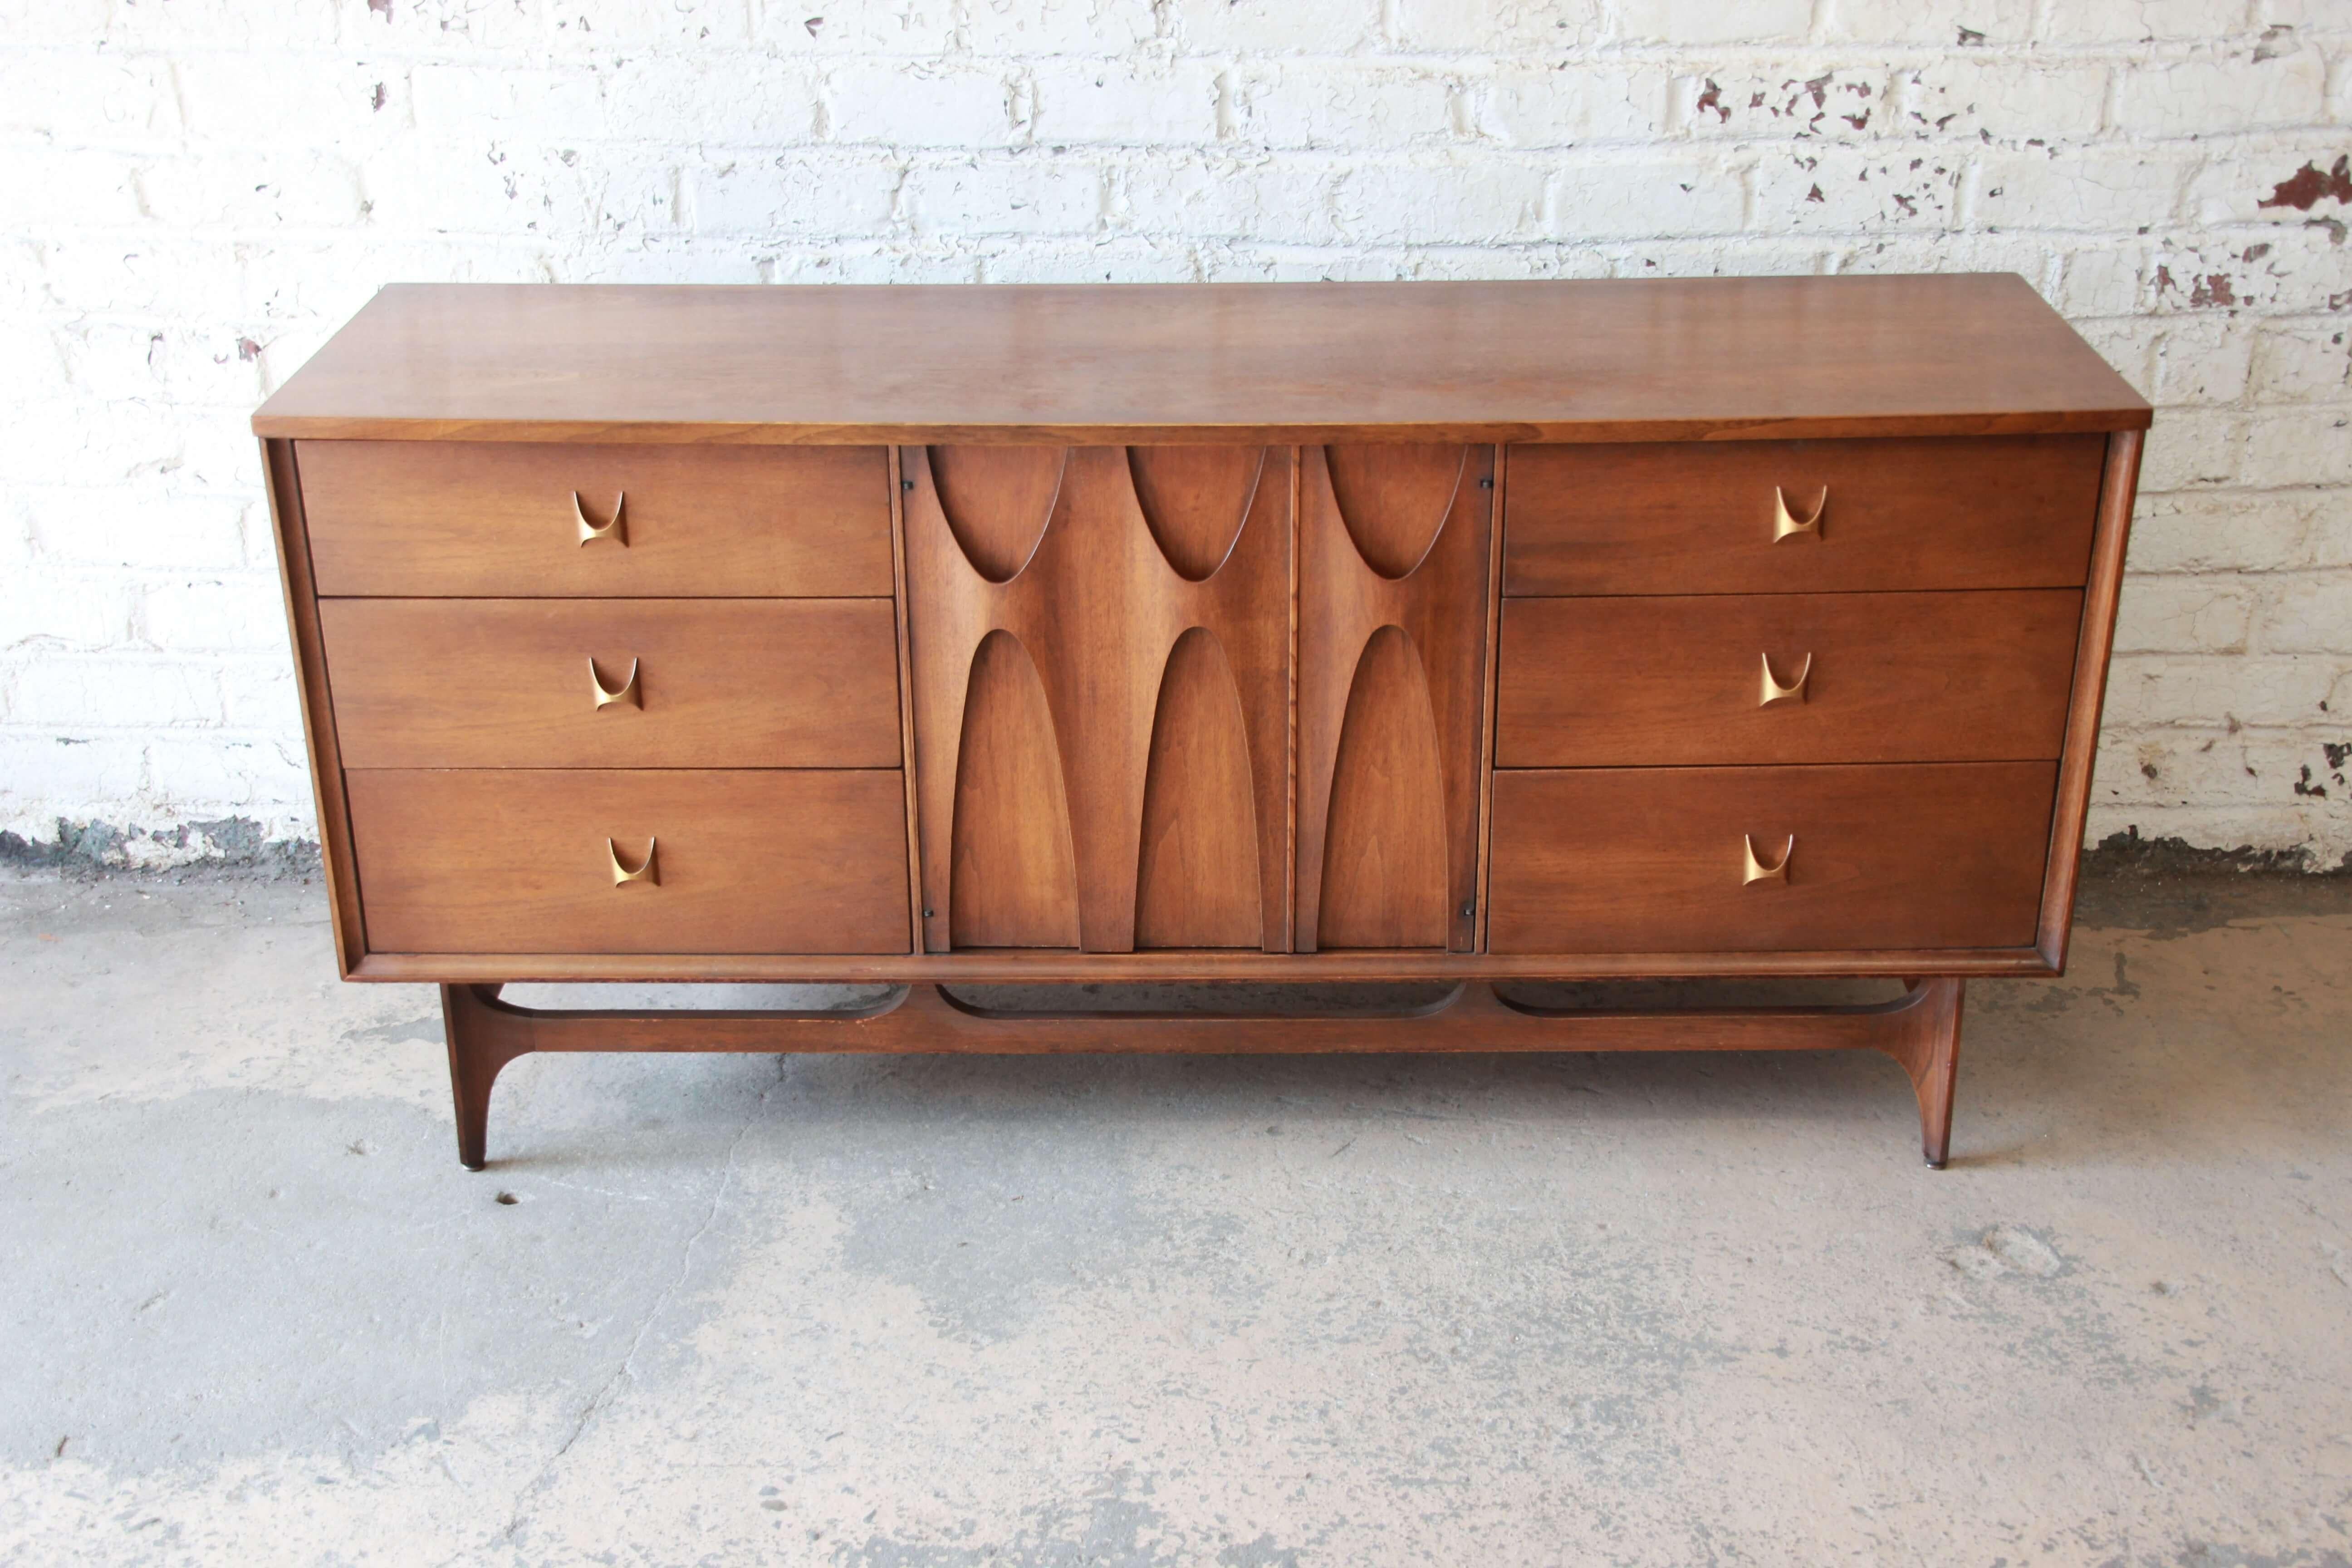 Offering an awesome Broyhill Brasilia sculpted walnut nine-drawer dresser or credenza. This piece has unique brass pulls on each drawer with the three smooth sliding drawers on each side. The center has sculpted arched pulls that are on two cabinet